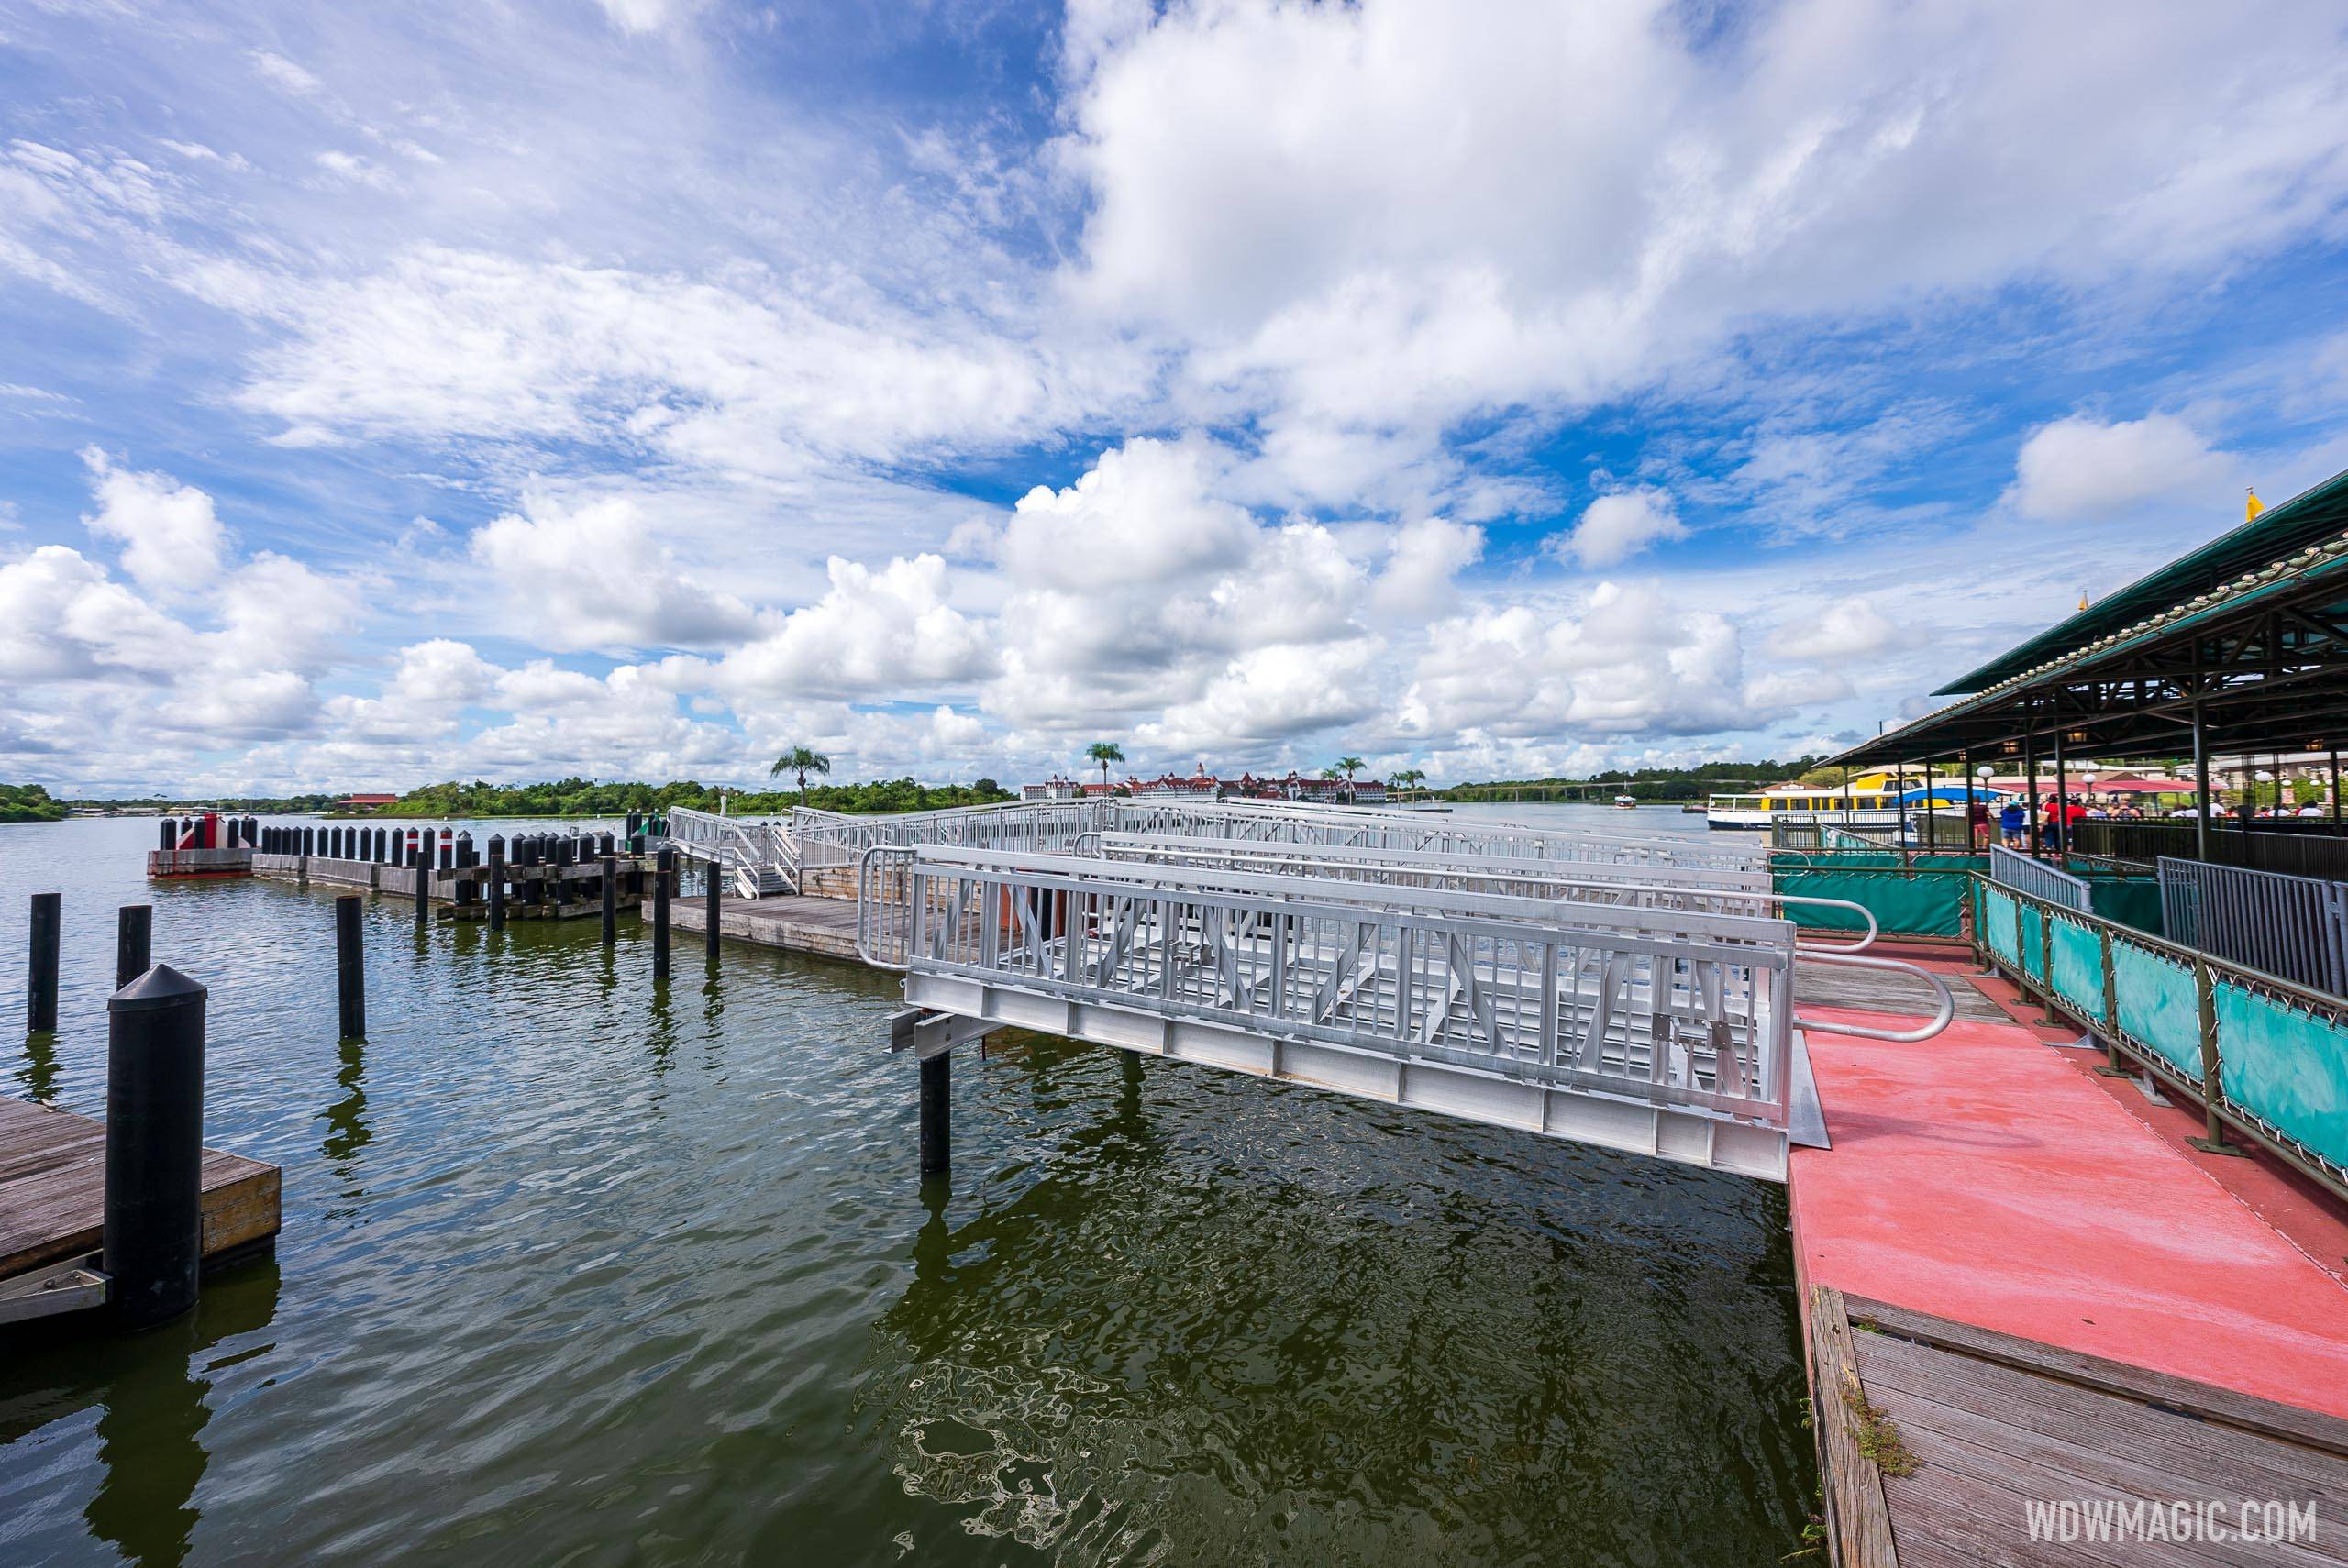 Gangway installation underway at the Magic Kingdom ferry boat dock for second level access